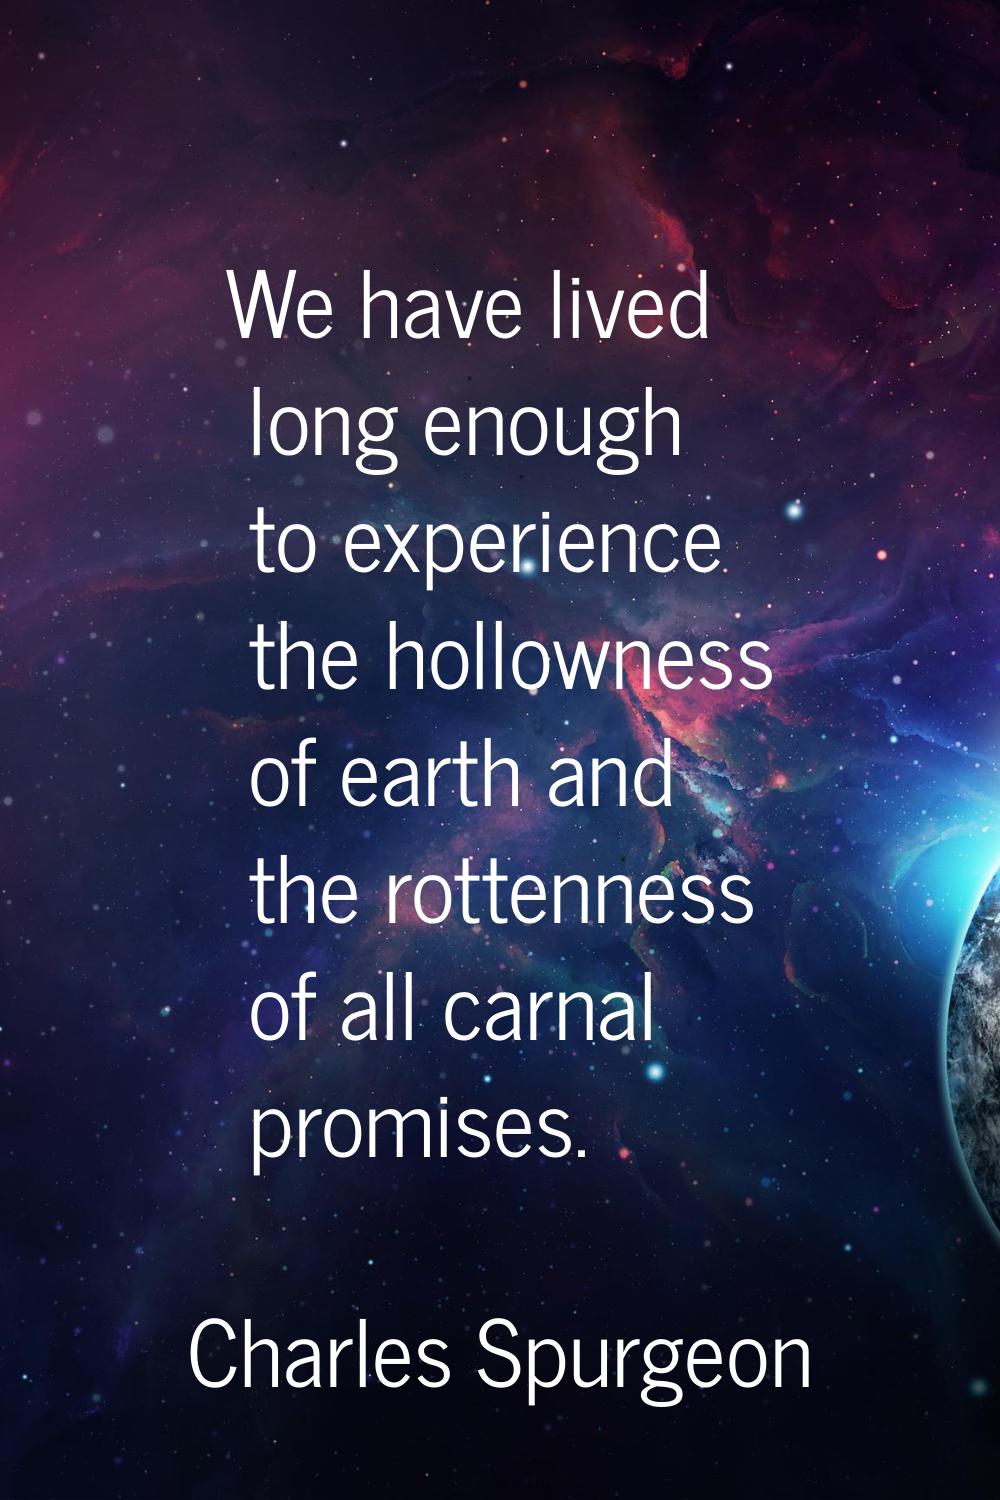 We have lived long enough to experience the hollowness of earth and the rottenness of all carnal pr